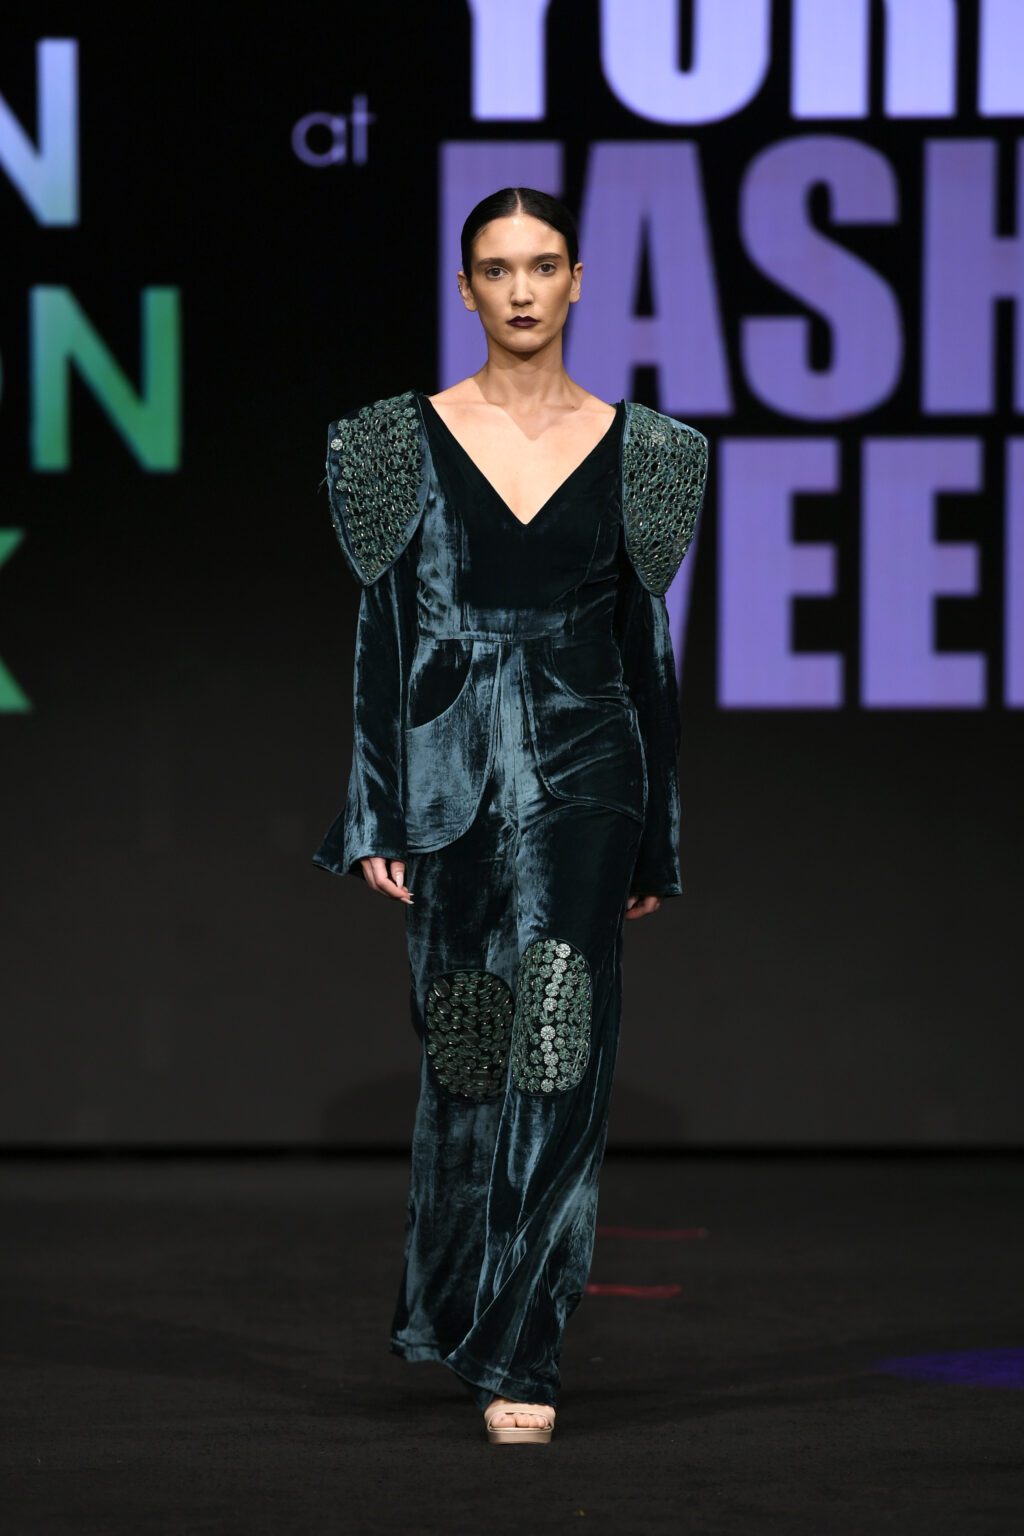 NEW YORK, NEW YORK - FEBRUARY 12: Cydney Gill walks the runway wearing  INIFD-LST India Fashion Trunk - At New York Fashion Week Powered By Art Hearts Fashion at The Ziegfeld Ballroom on February 12, 2022 in New York City. (Photo by Arun Nevader/Getty Images for Art Hearts Fashion)